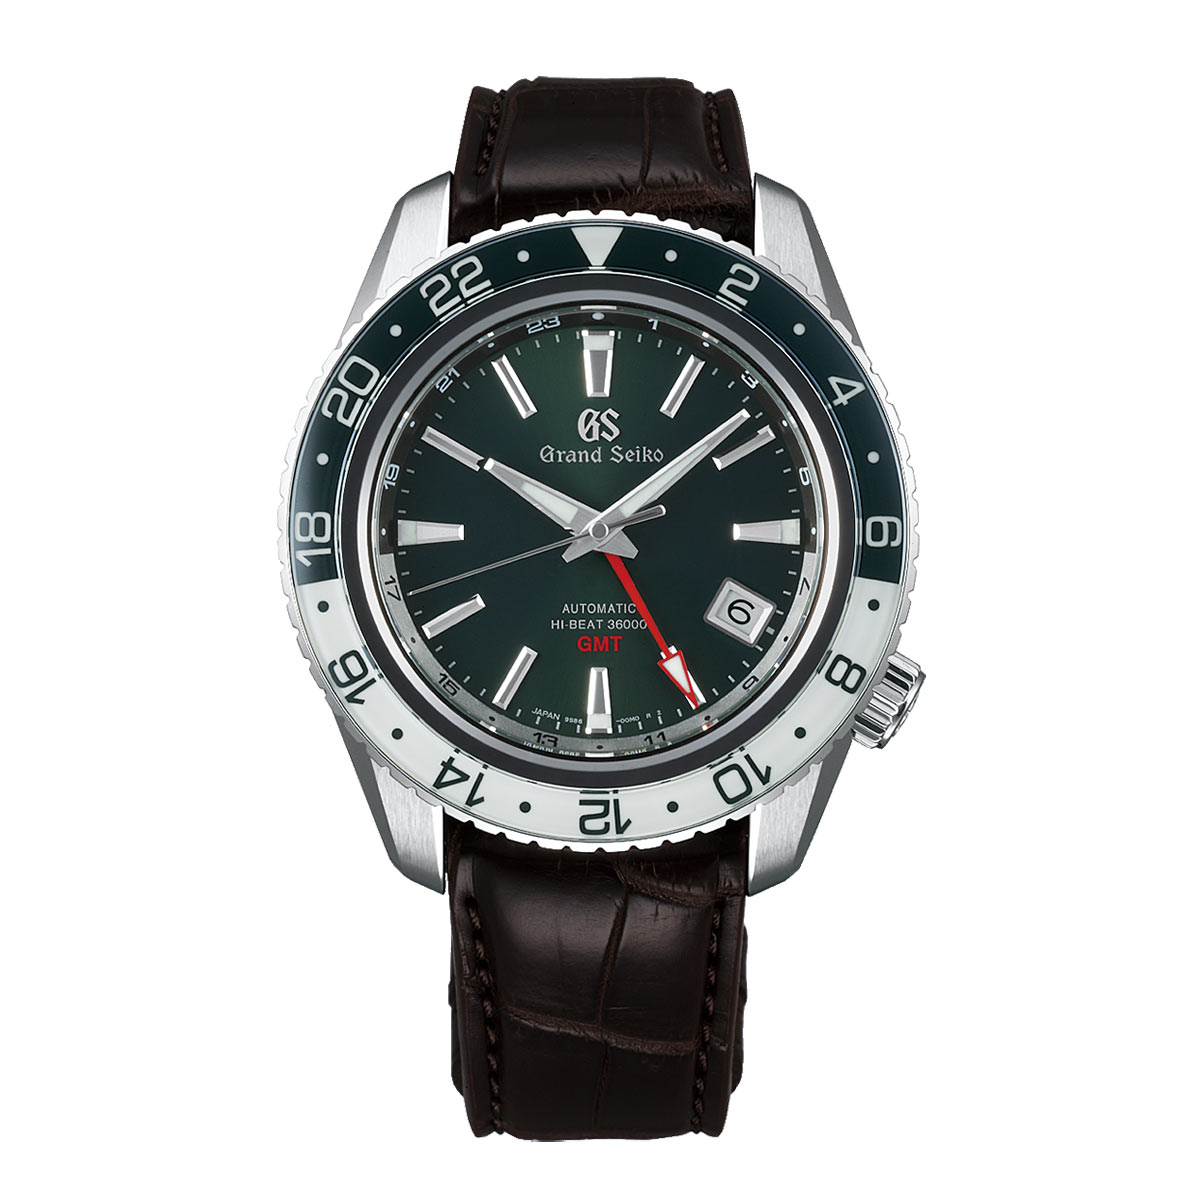 Grand Seiko - Sport Collection GMT SBGJ237 and SBGJ239 | Time and Watches |  The watch blog